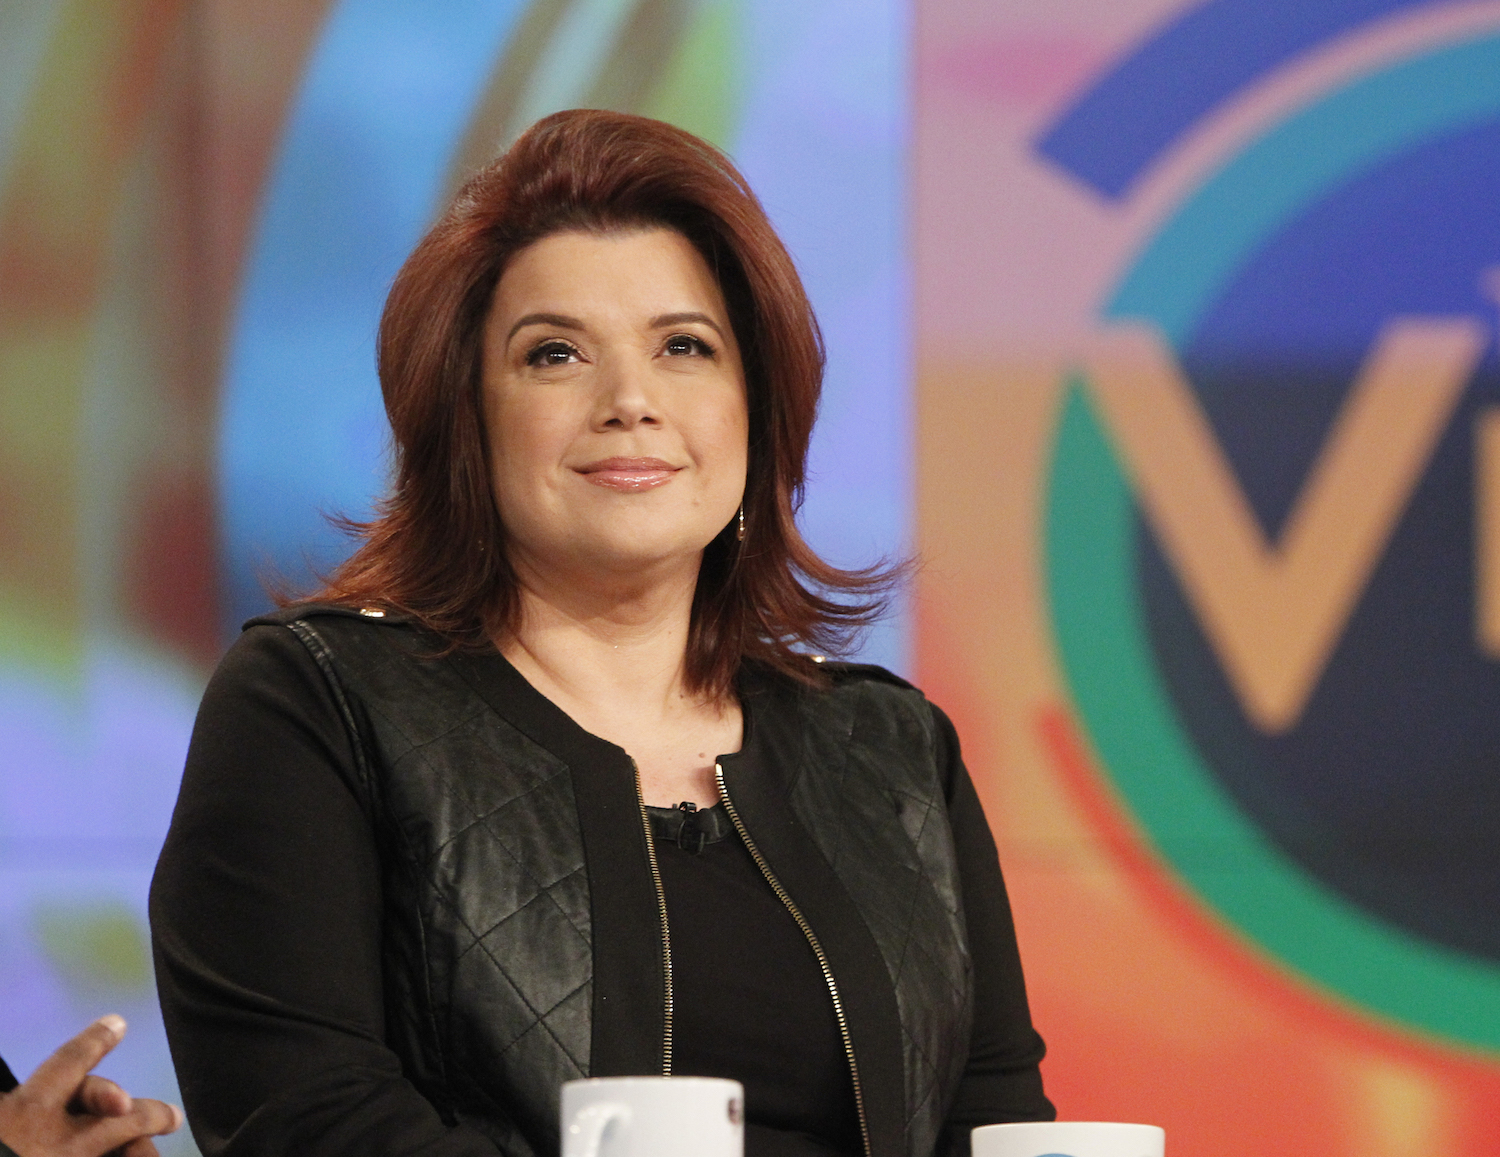 Ana Navarro sitting and observing